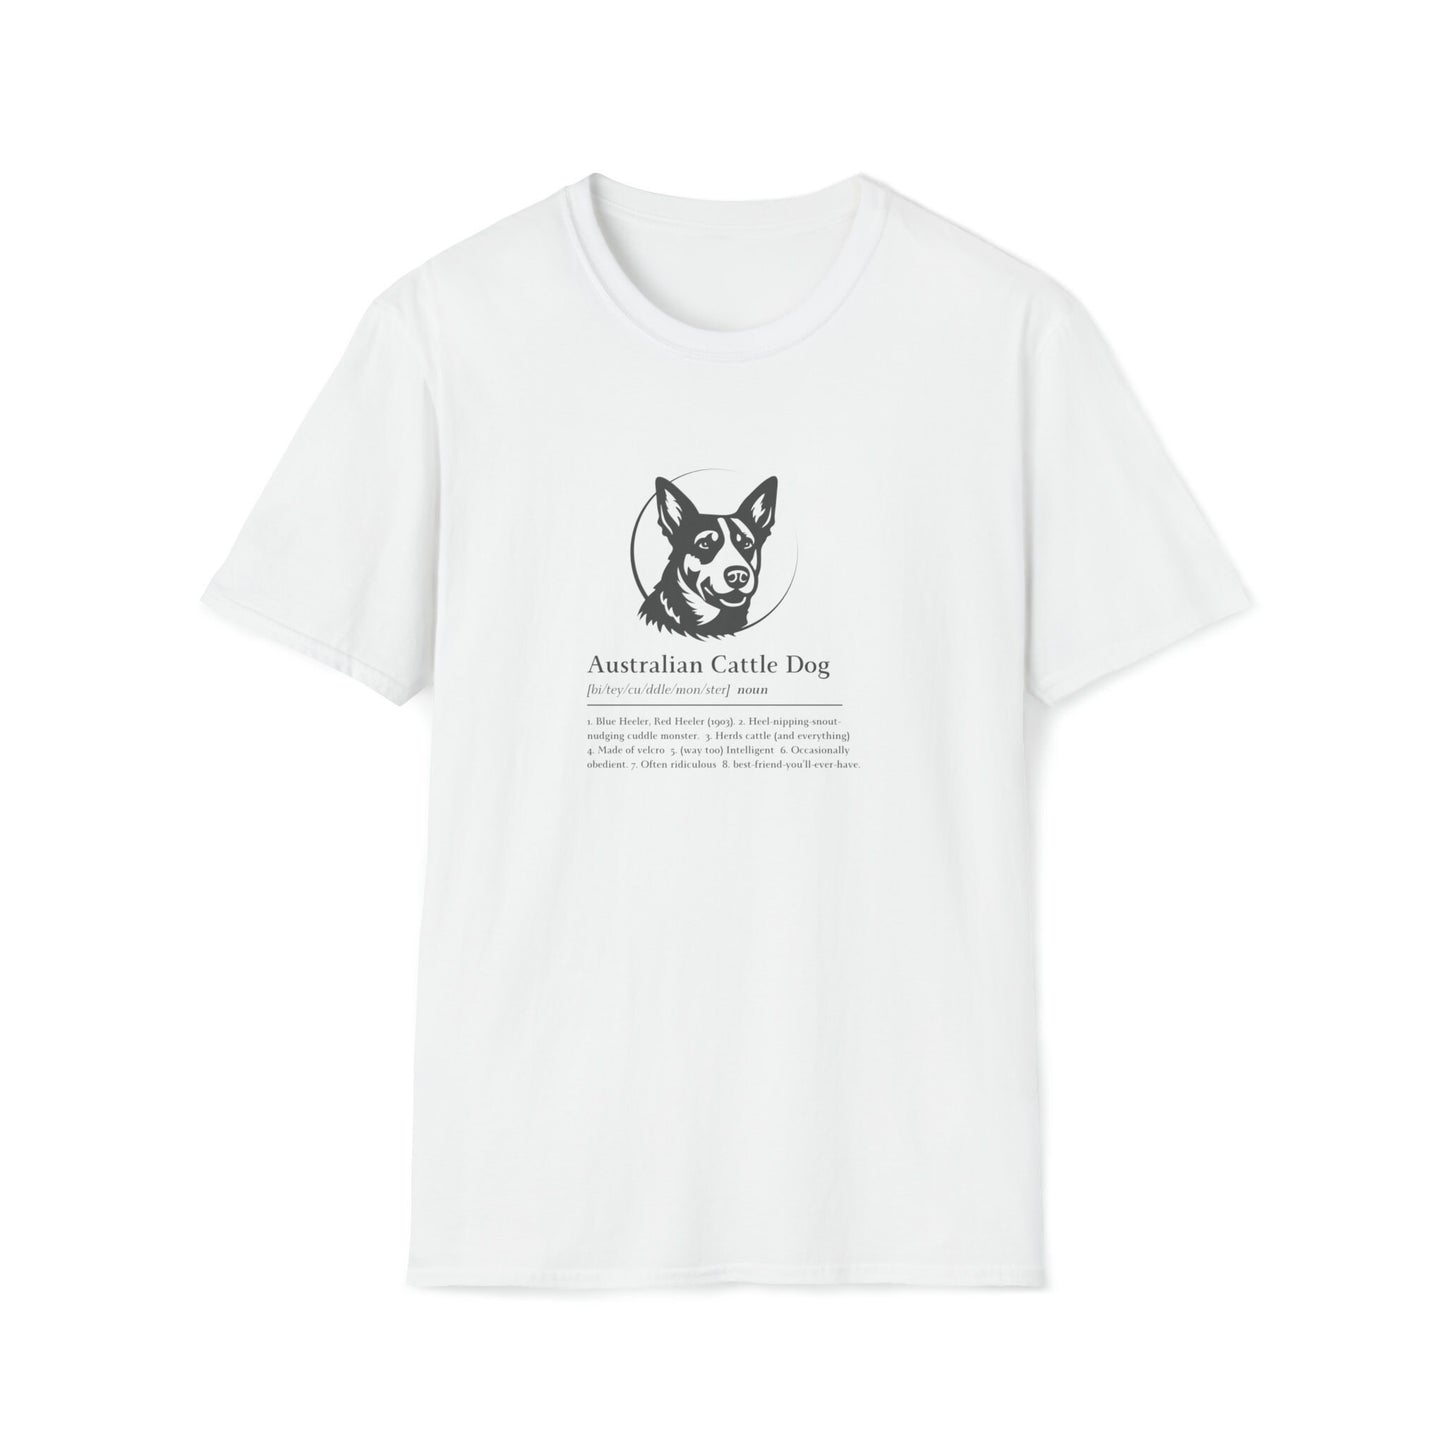 Australian Cattle Dog Funny Definition T-Shirt / Blue Heeler T-Shirt / Funny Cattle Dog T-Shirt / Cattle Dog Love / quirky cattle dog trait